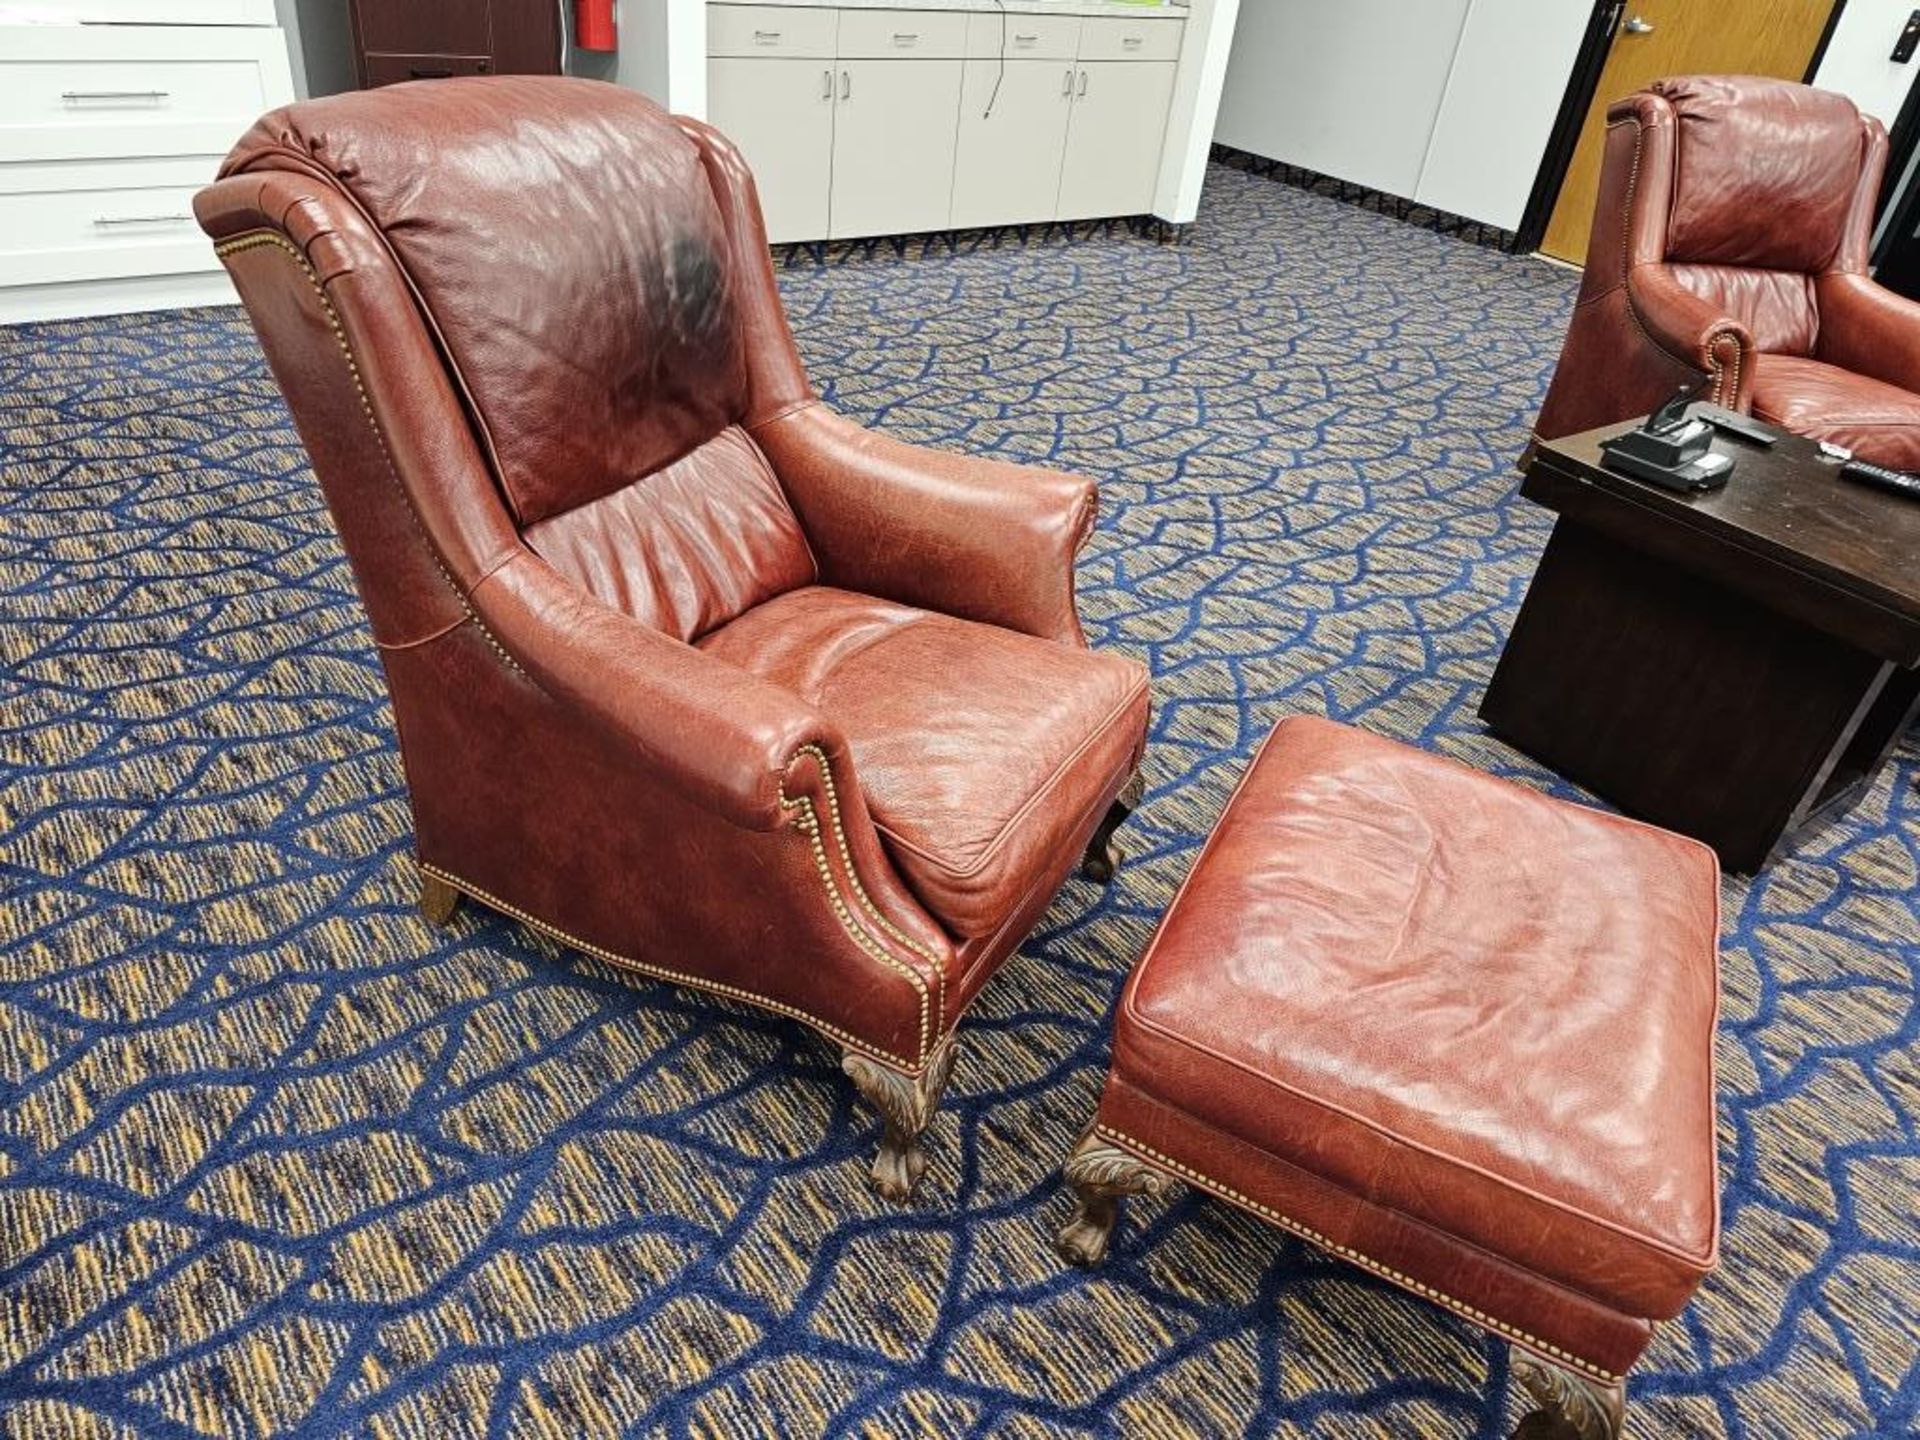 (2) Robb & Stucky Leather Chairs With Foot Stools